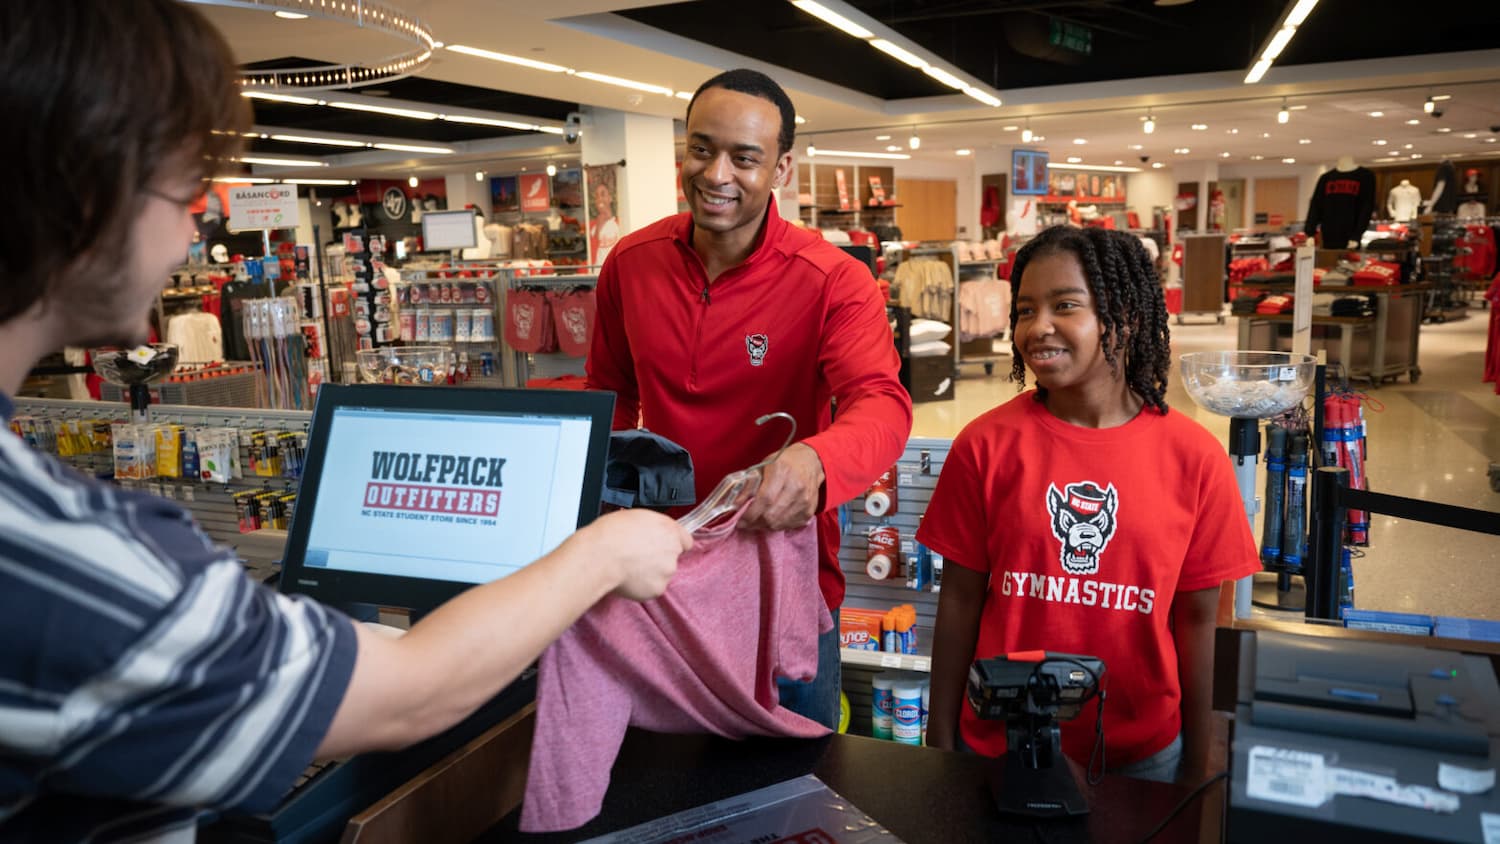 A father and daughter buy Wolfpack merchandise.